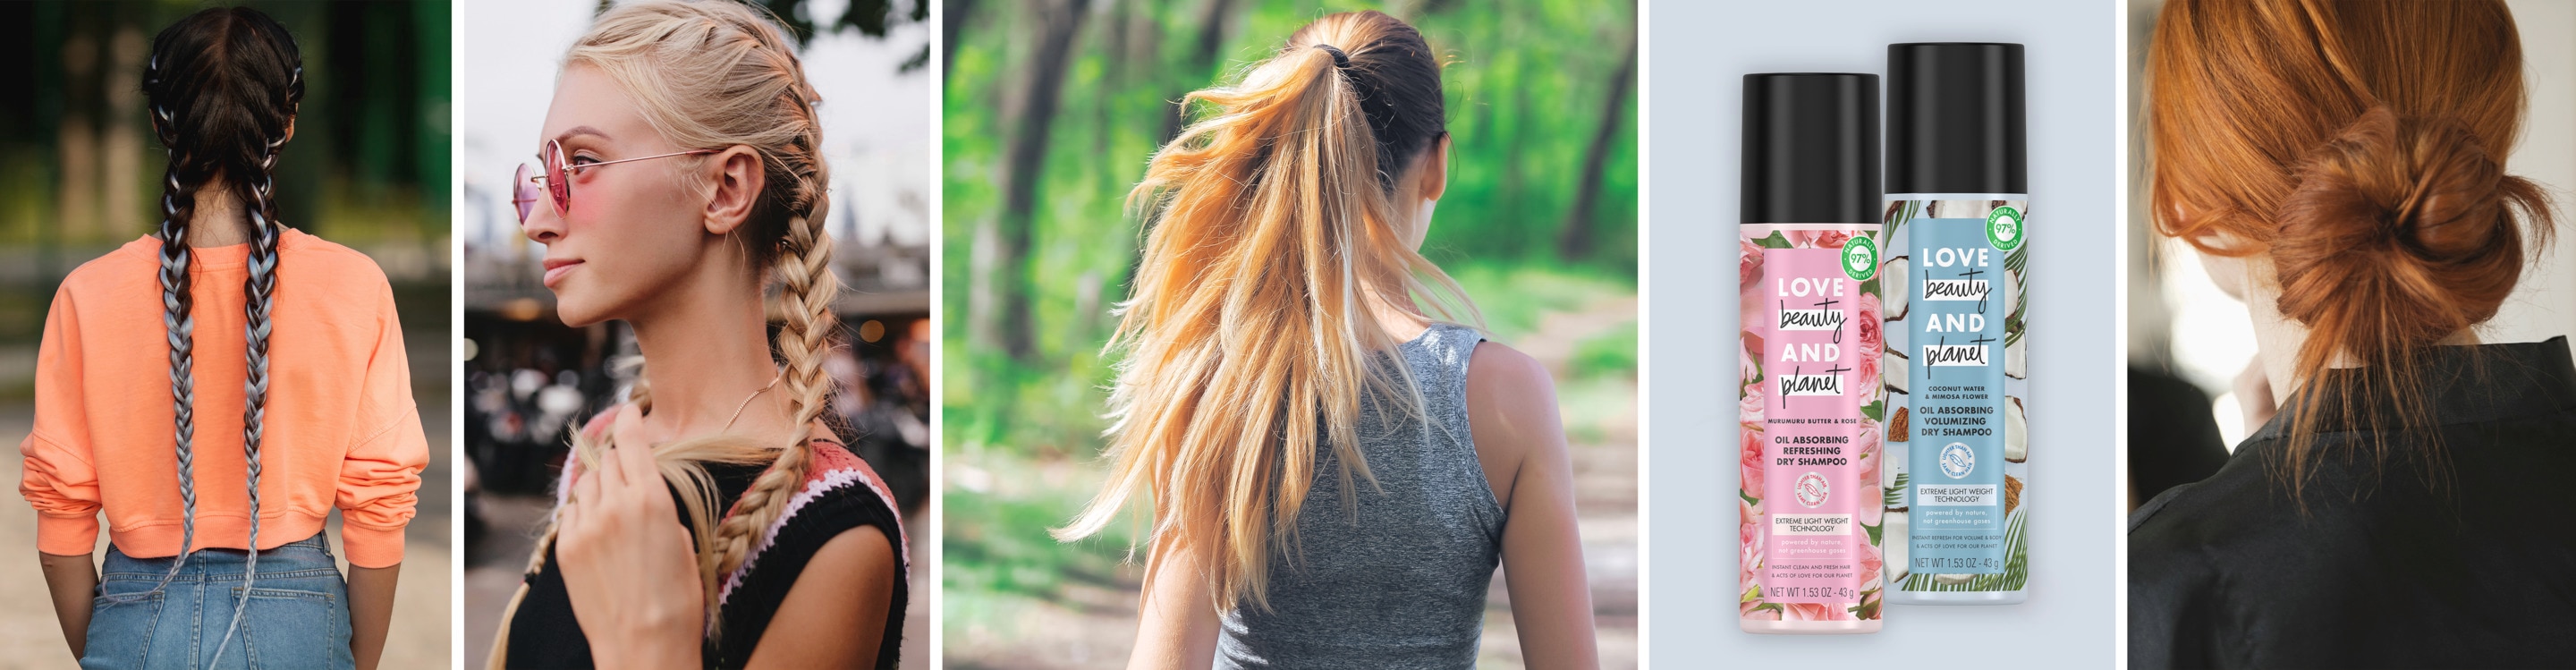 Post Workout Hair Tips: Header Image of Woman Jogging and Love Beauty and Planet Dry Shampoos